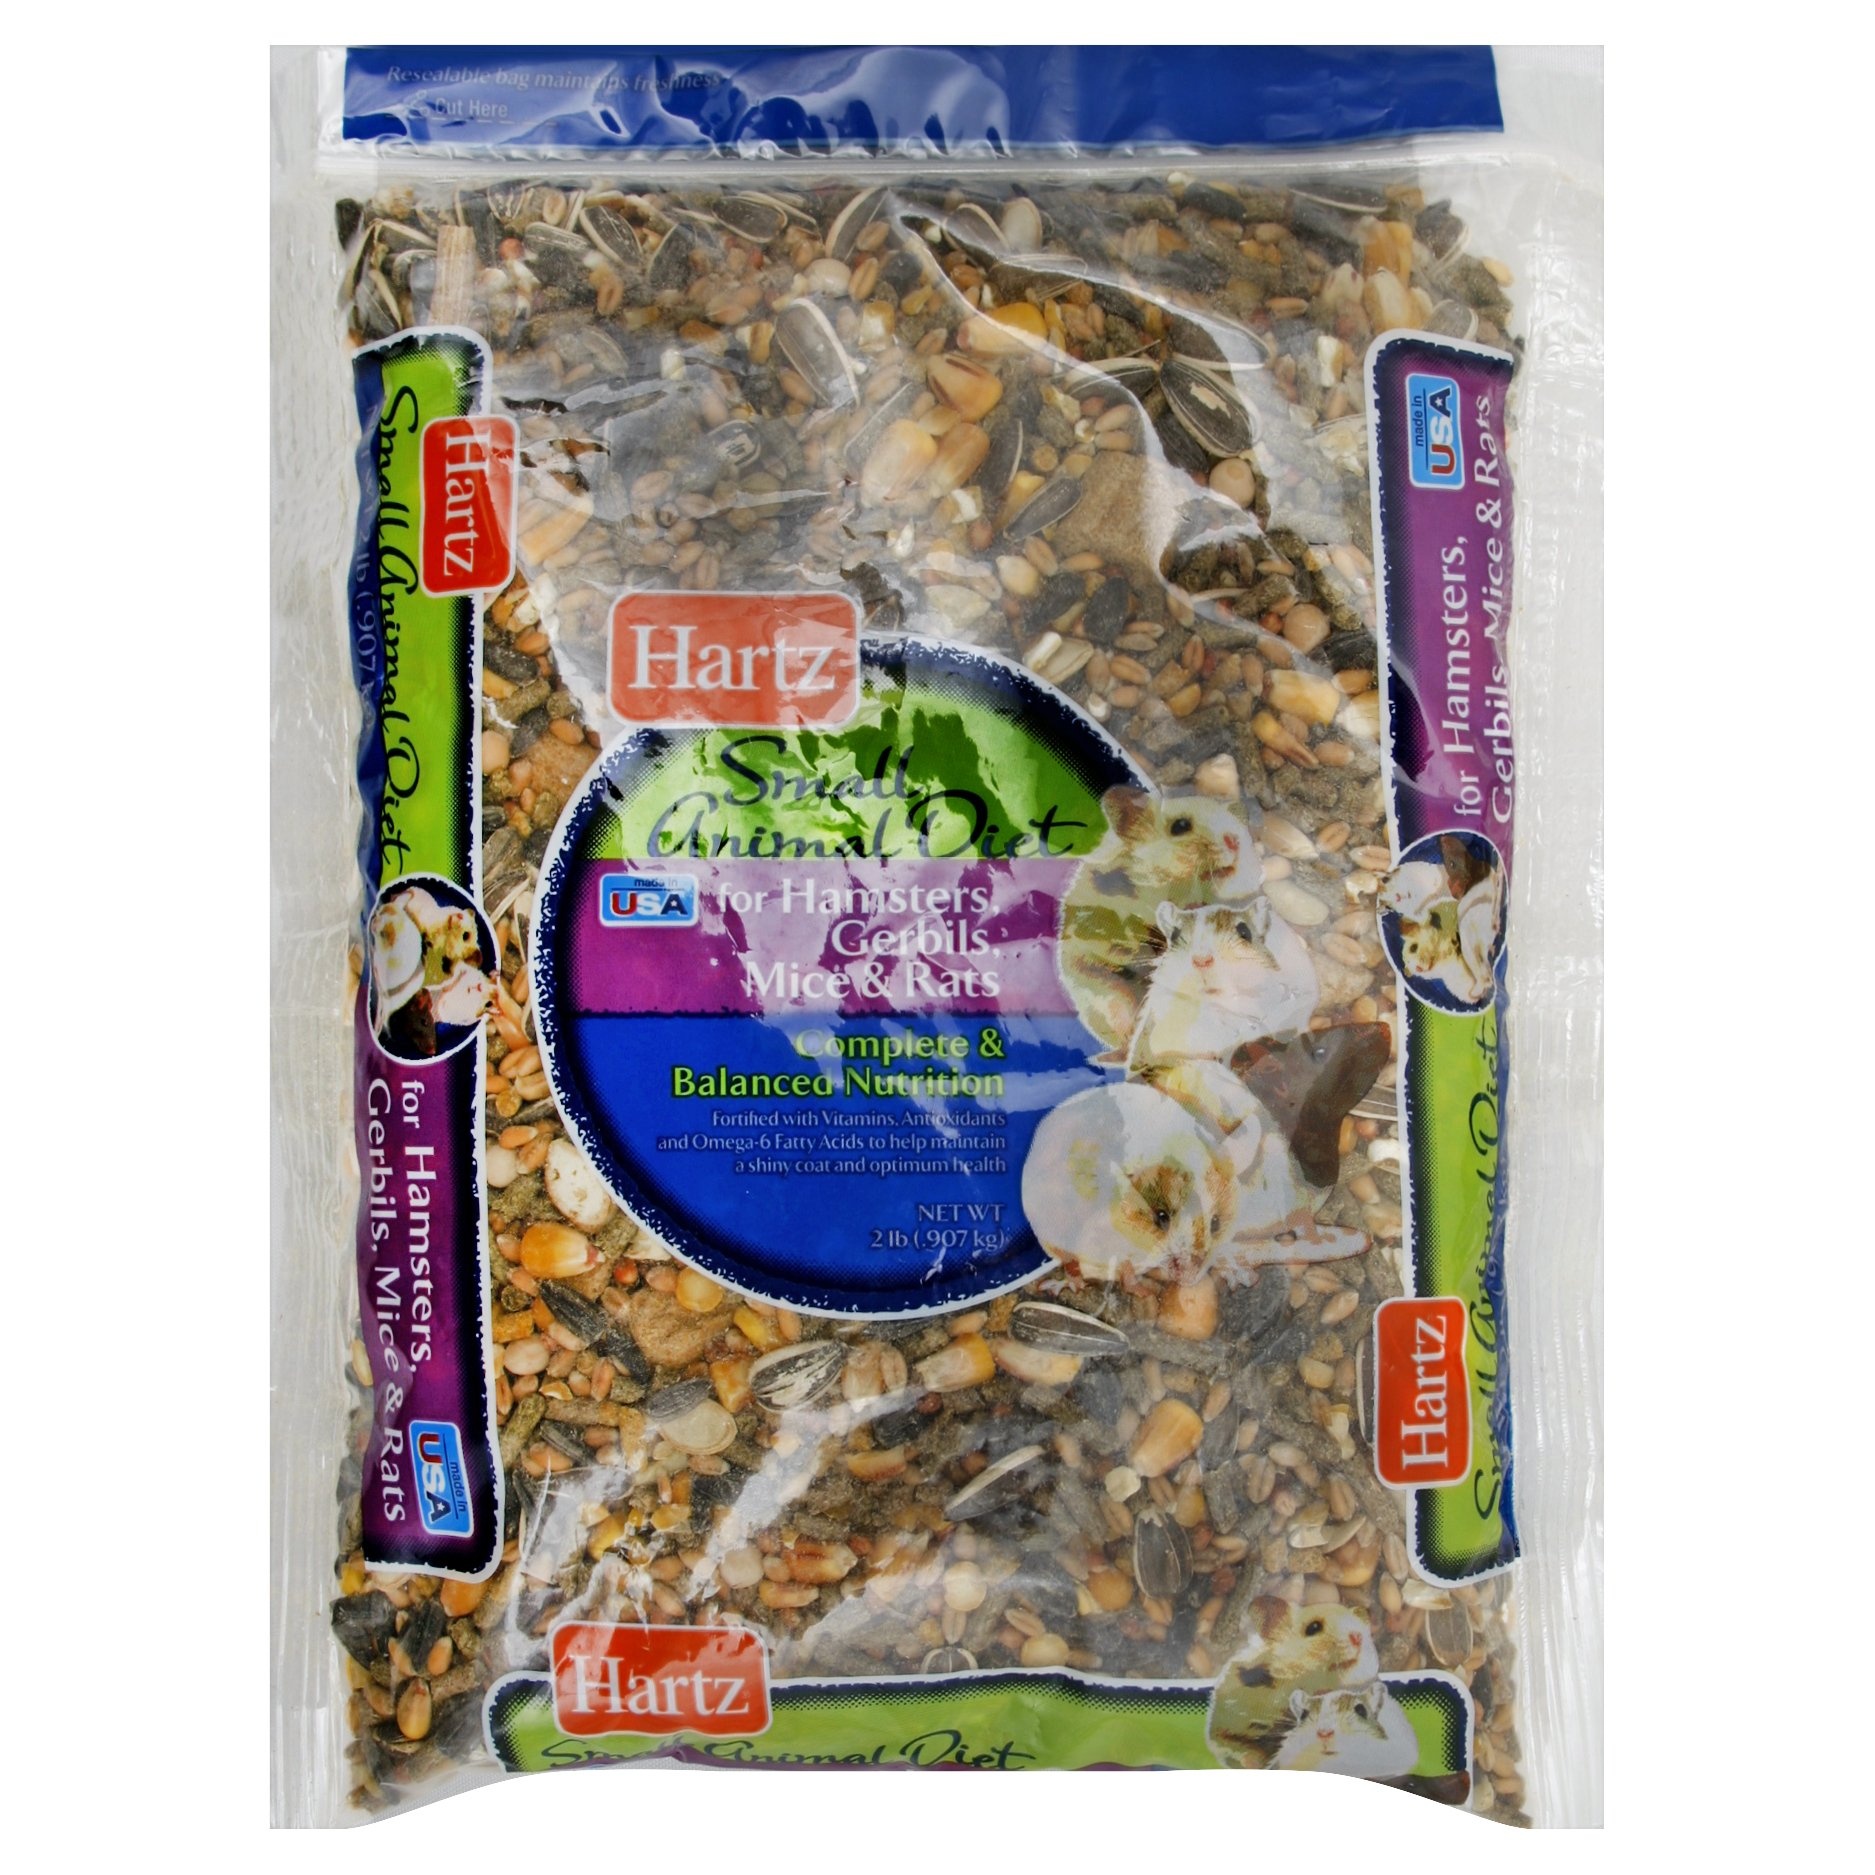 slide 1 of 1, Hartz Small Animal Diet for Hamsters Gerbils Mice Rats, 2 lb